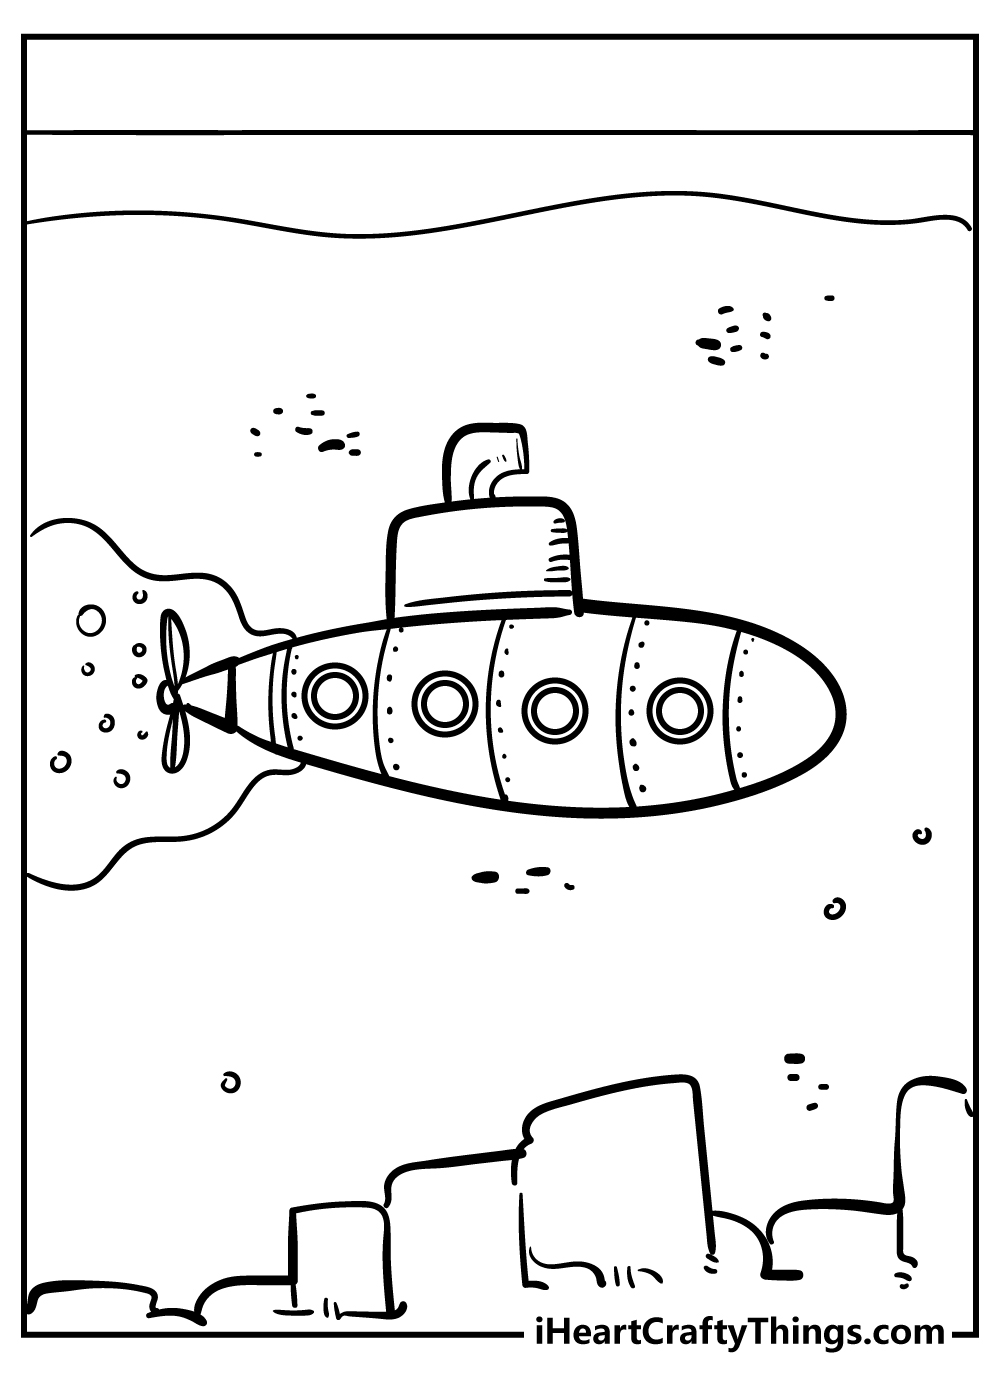 Submarine Coloring Book for adults free download